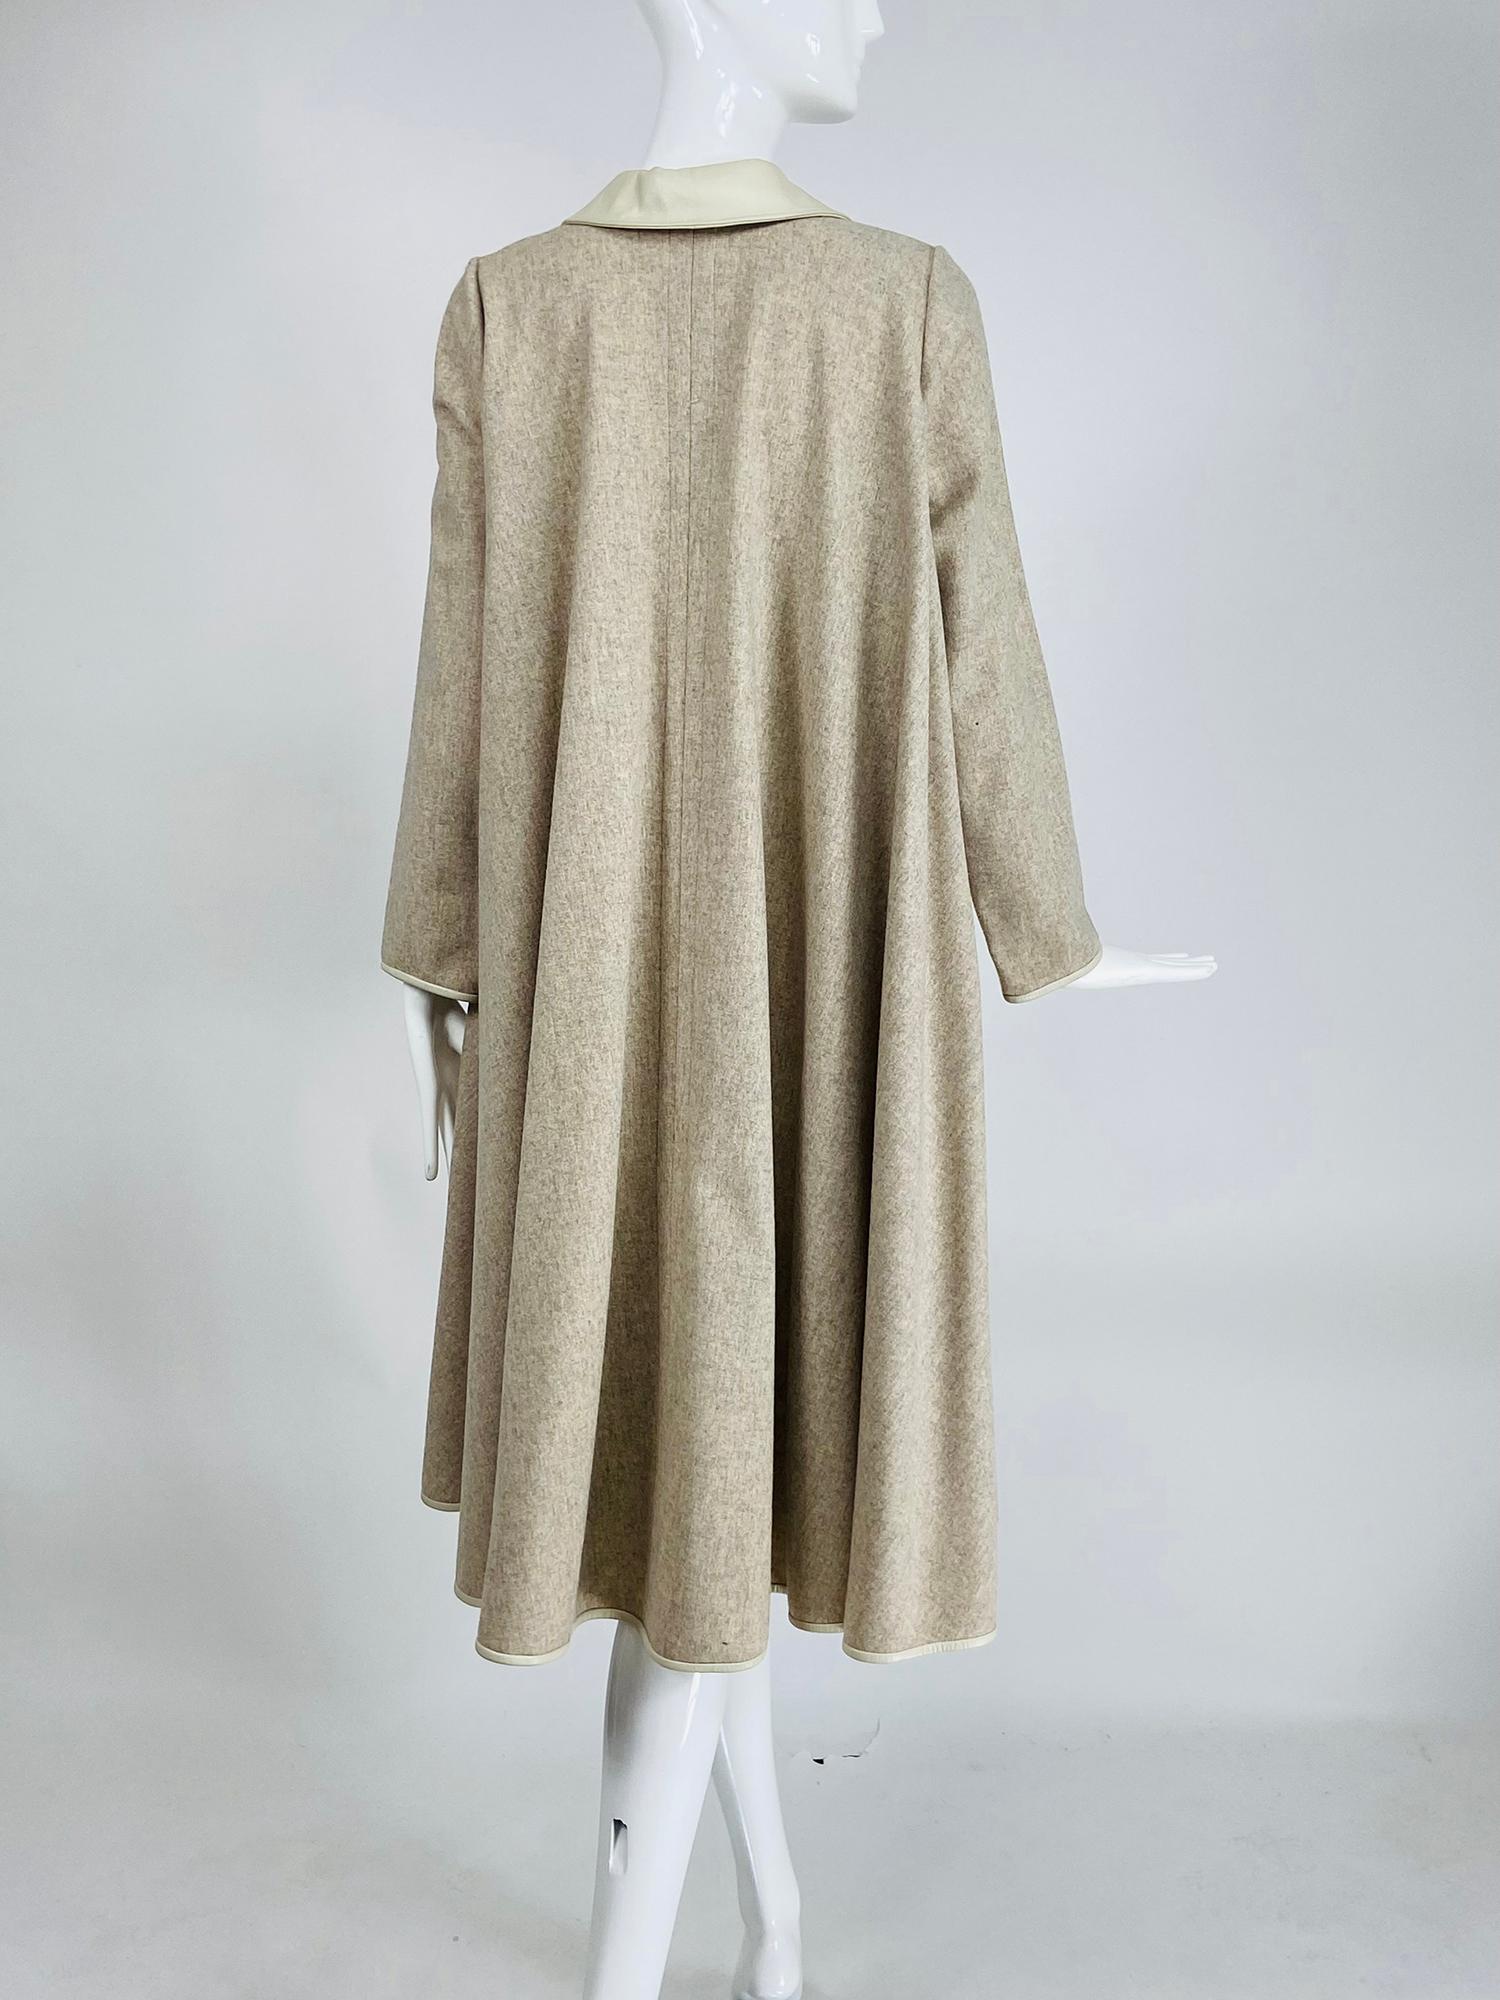 Gray Bonnie Cashin Oatmeal Double Faced Wool Bias Circle Leather Trimmed Coat 1970s For Sale